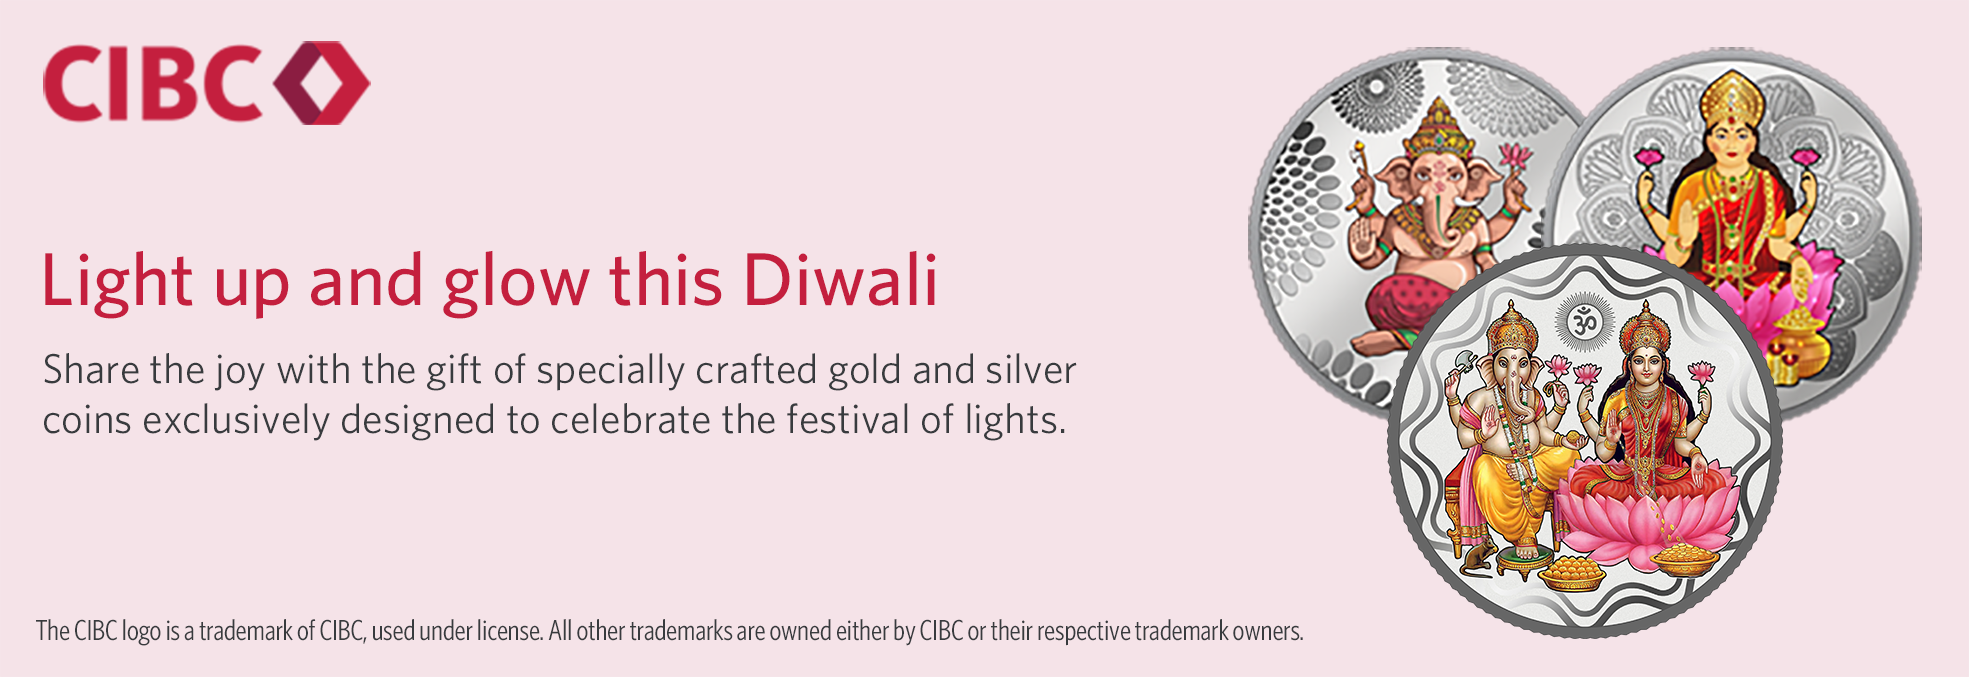 Light up and glow this Diwali. Share the joy with the gift of specially crafted gold and silver coins exclusively designed to celebrate the festival of lights.